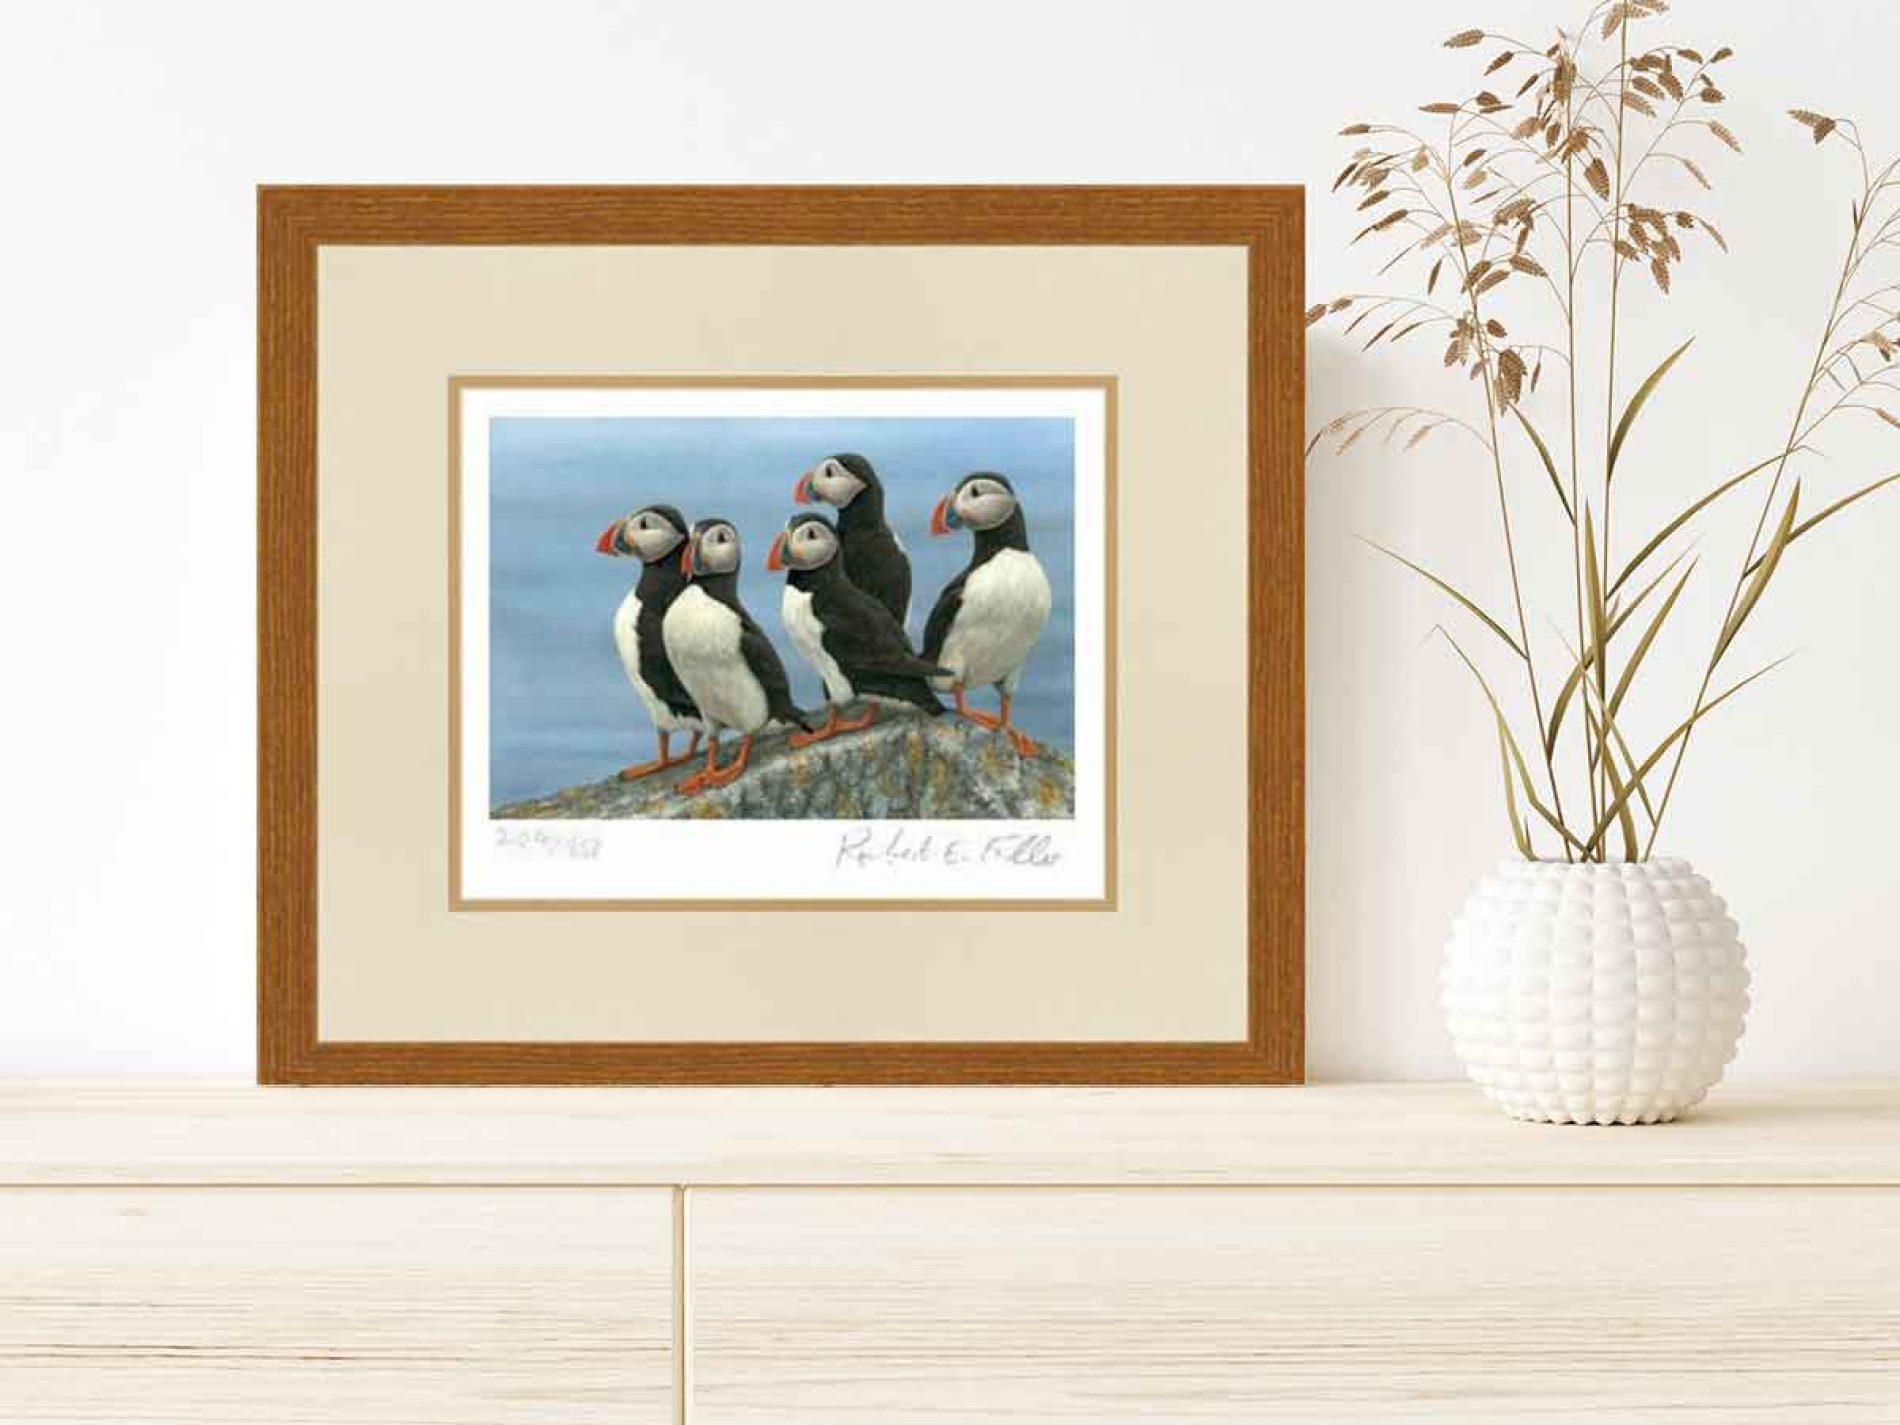 1200x900-Puffins-on-Lookout-Rustic-Country-iStock-1263936648